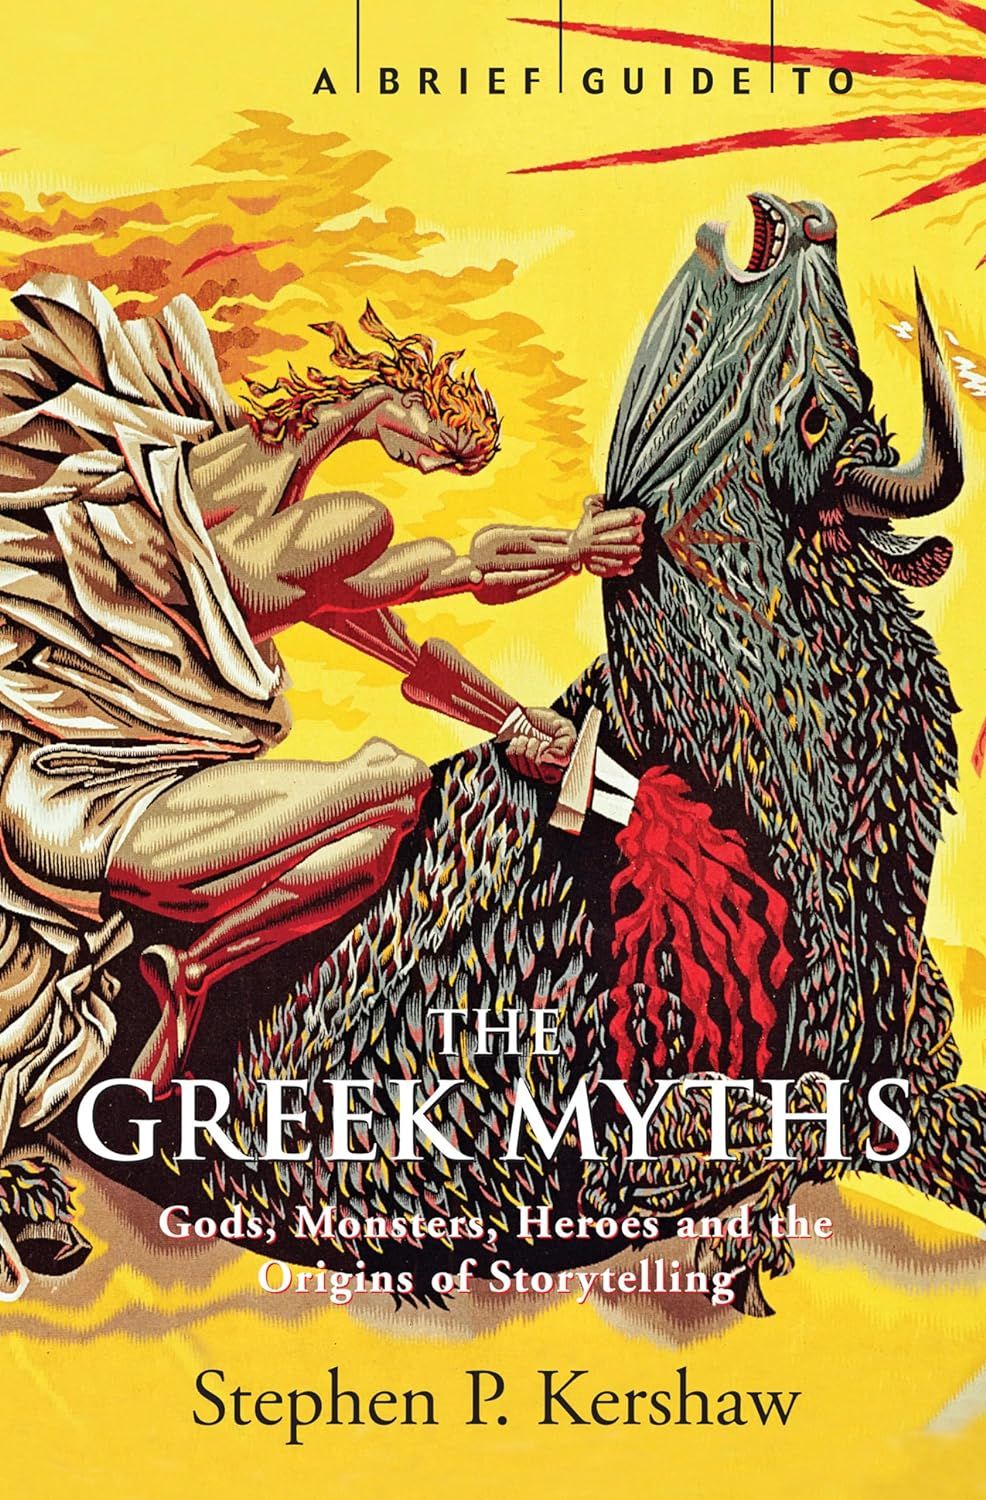 Обложки миф. Orchard book of first Greek Myths.